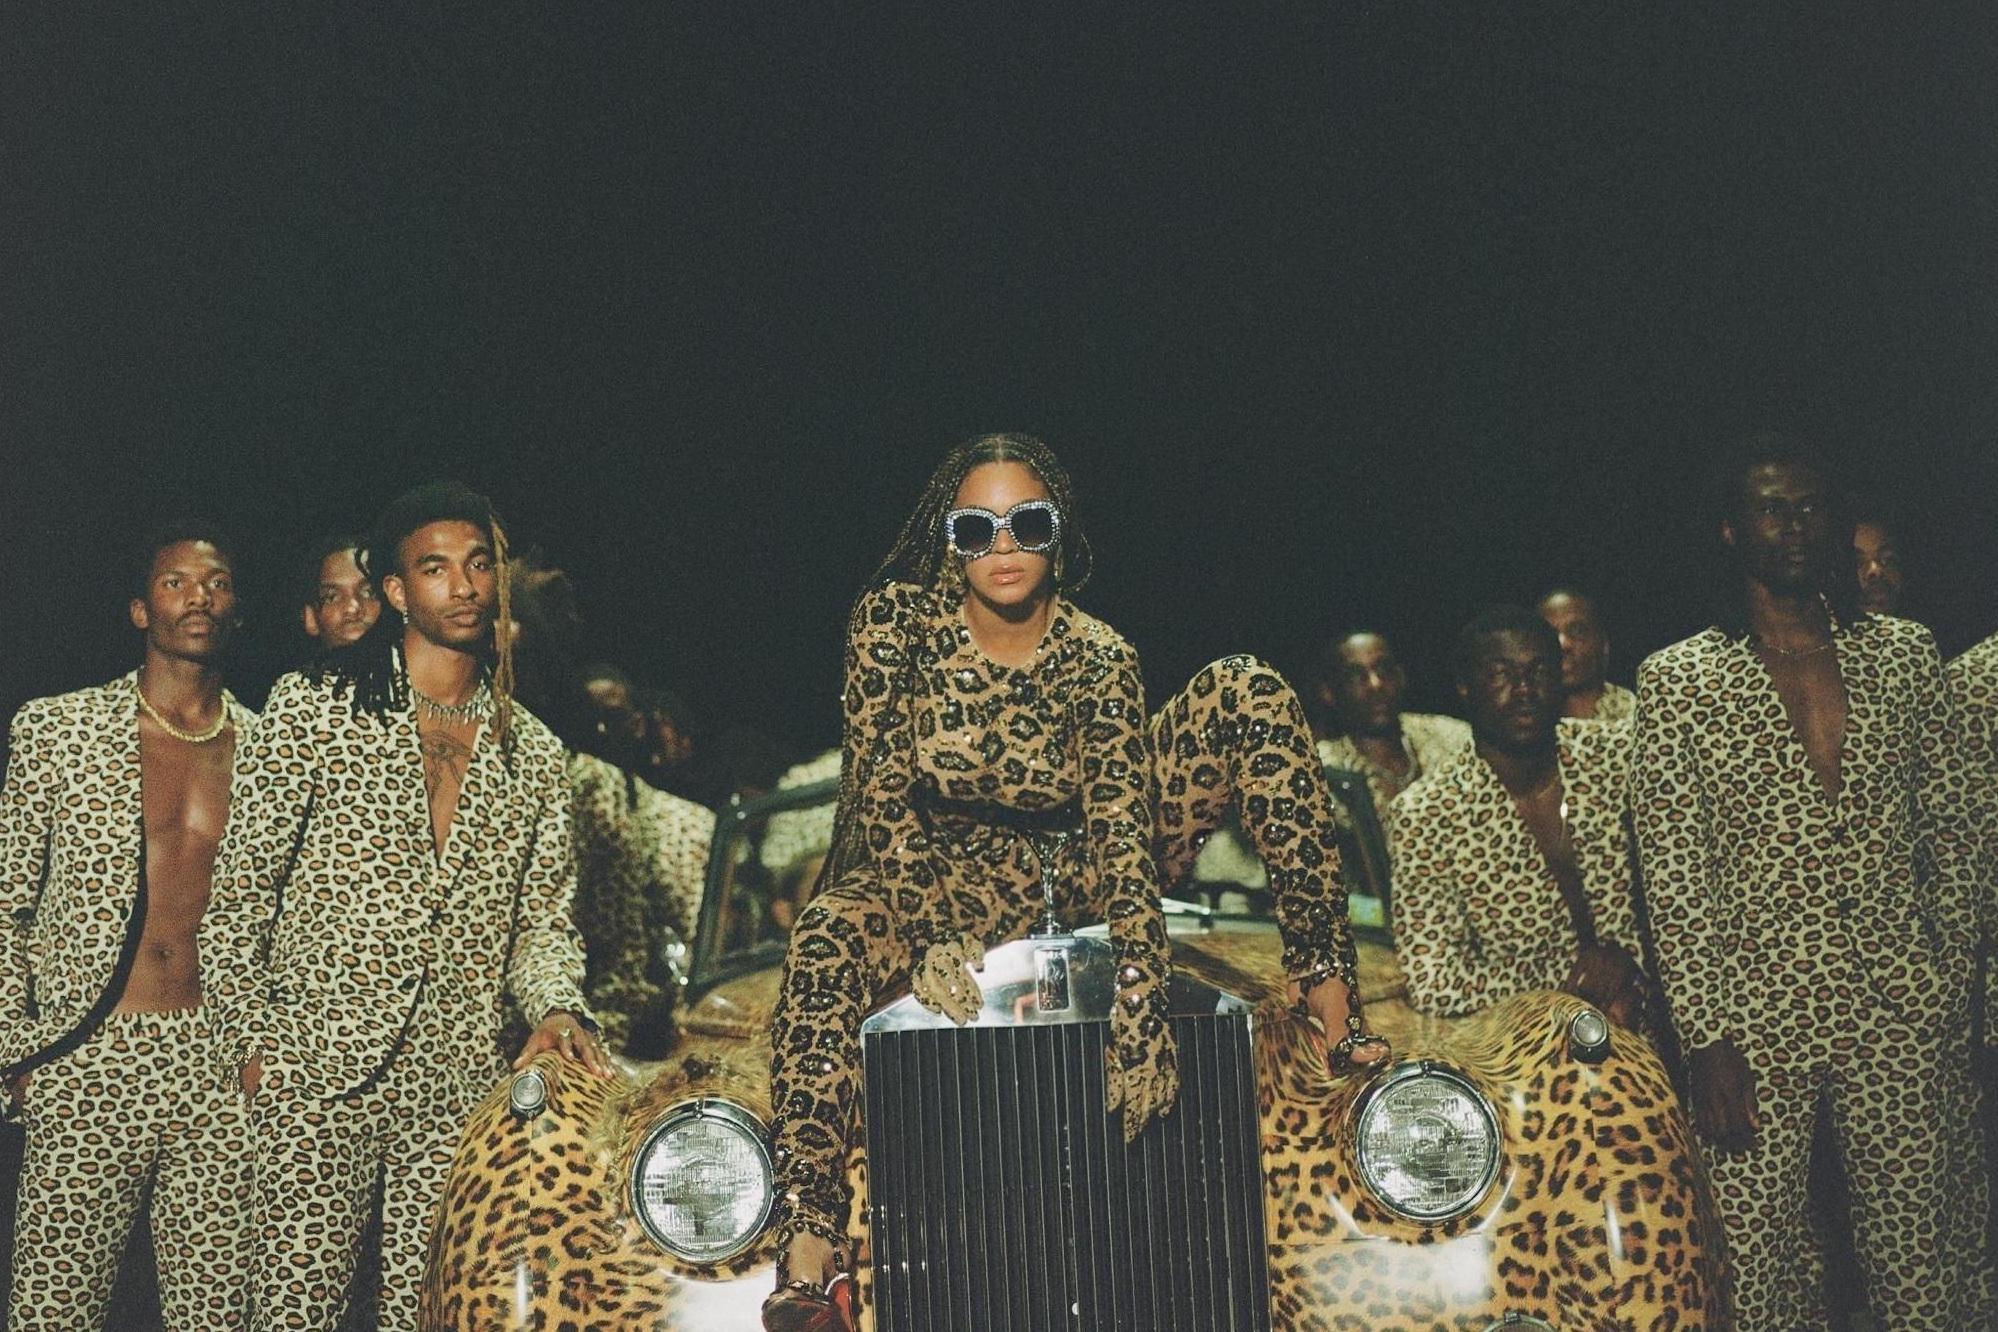 Beyoncé in a still from her visual album, ‘Black is King'